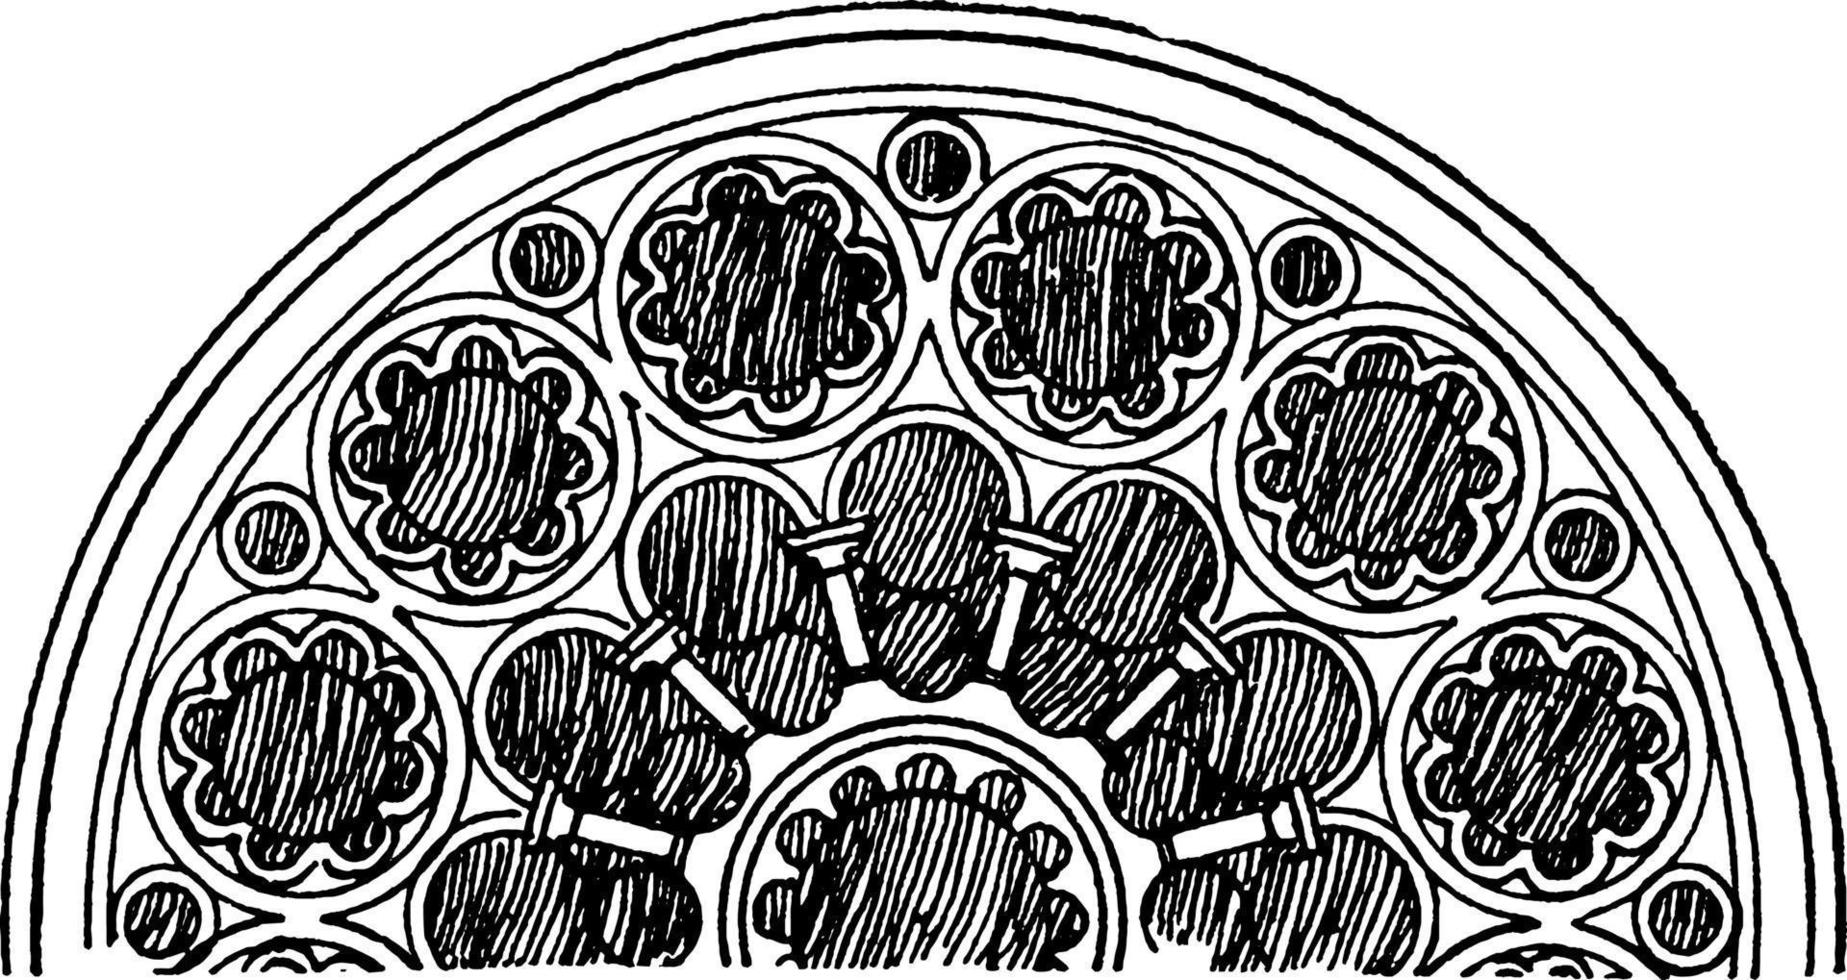 Tracery is a Half of west rose window, vintage engraving. vector